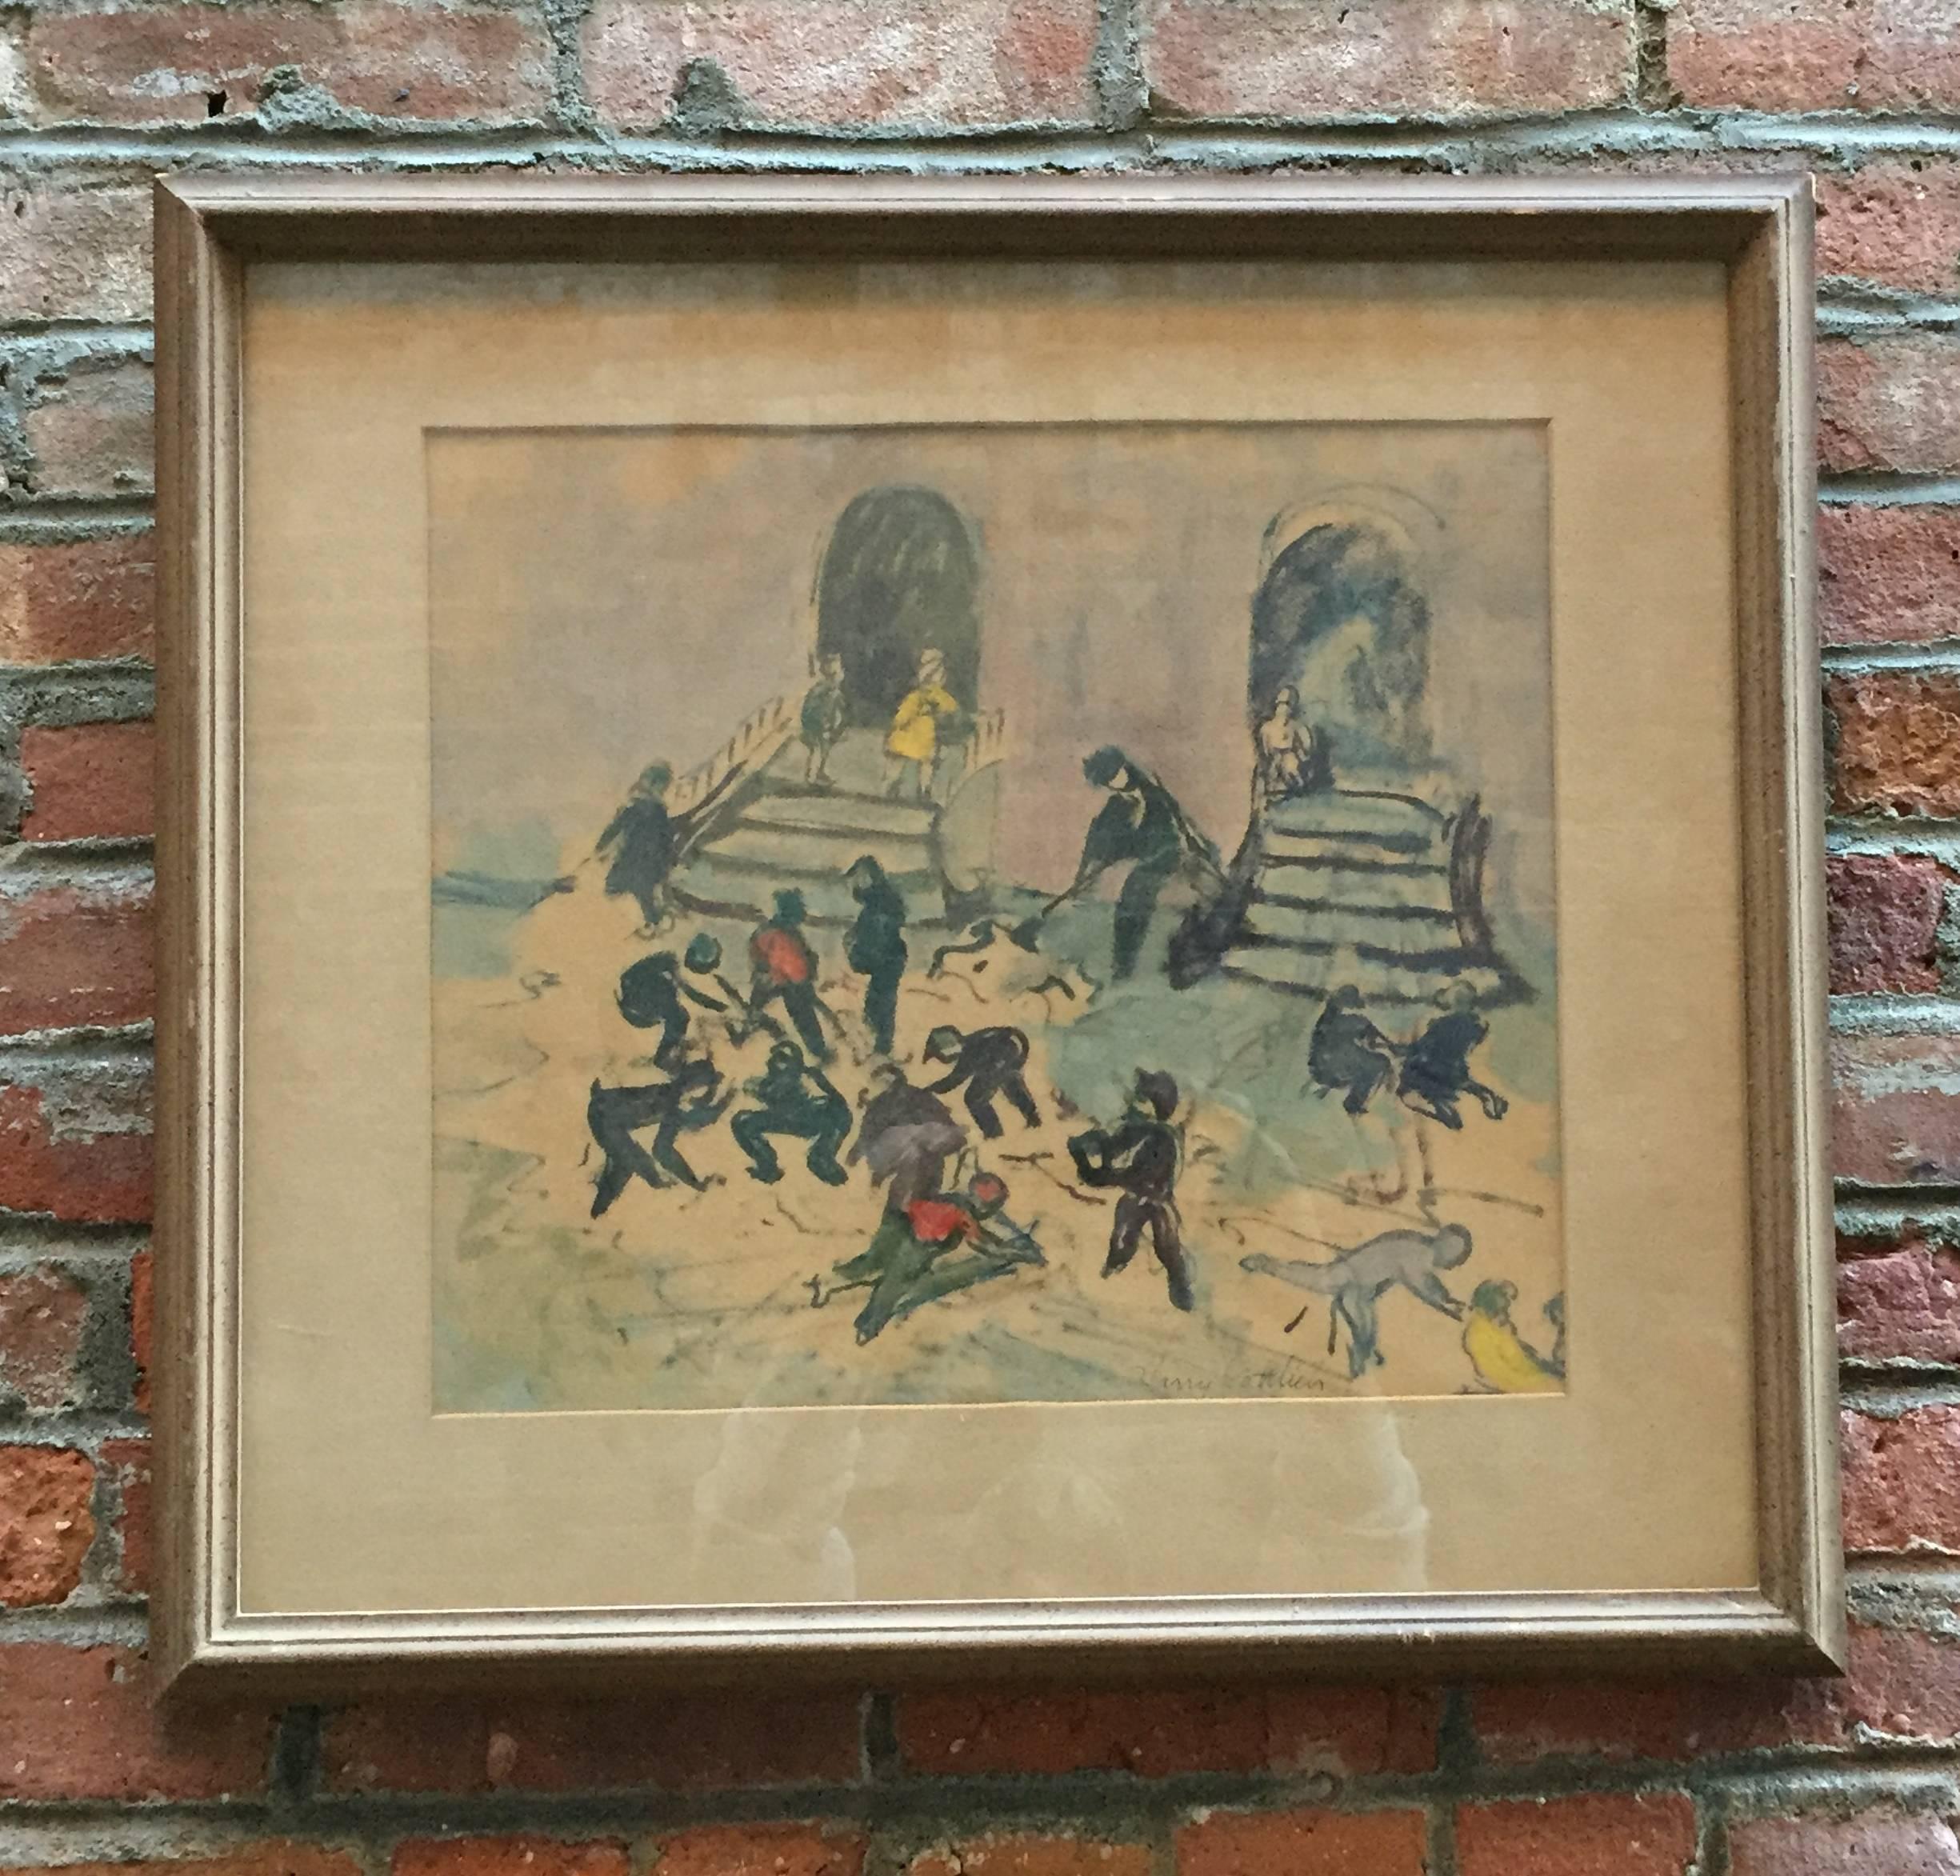 Signed Harry Gottlieb gouache and pastel on paper. Signed lower right framed and matted. Circa 1930-40. The piece has never been viewed out of the frame, but looks to be in very good original condition; no rips, tears, foxing, paint loss or